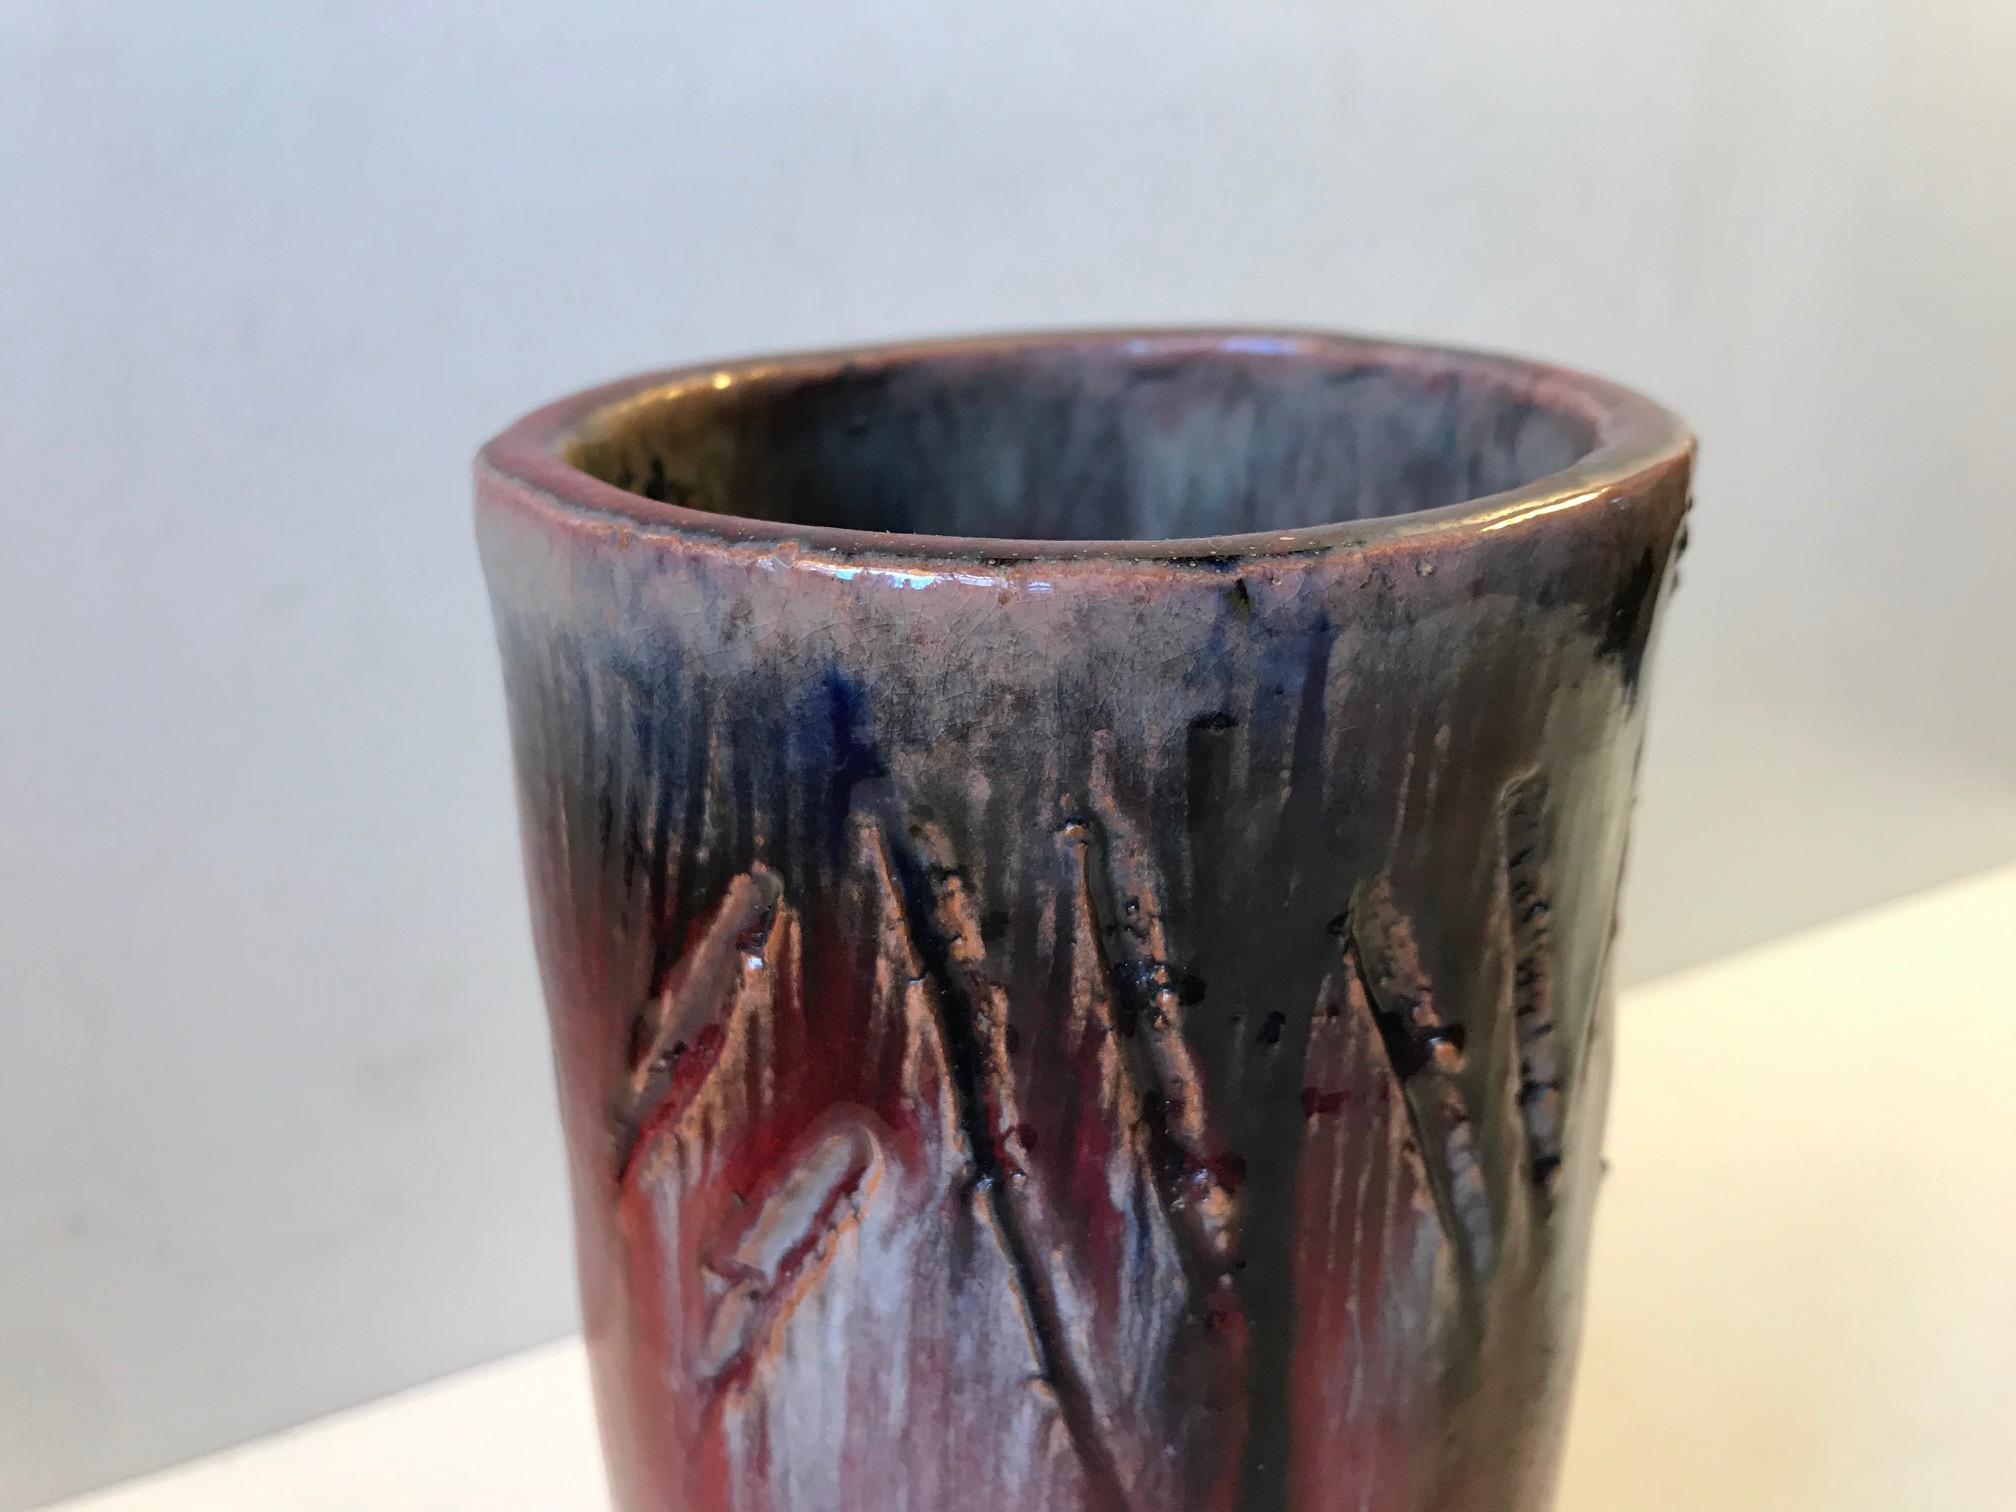 Scandinavian Modern Unique Danish Cylindrical Ceramic Vase in Oxblood and Drip Glaze, 1960s For Sale